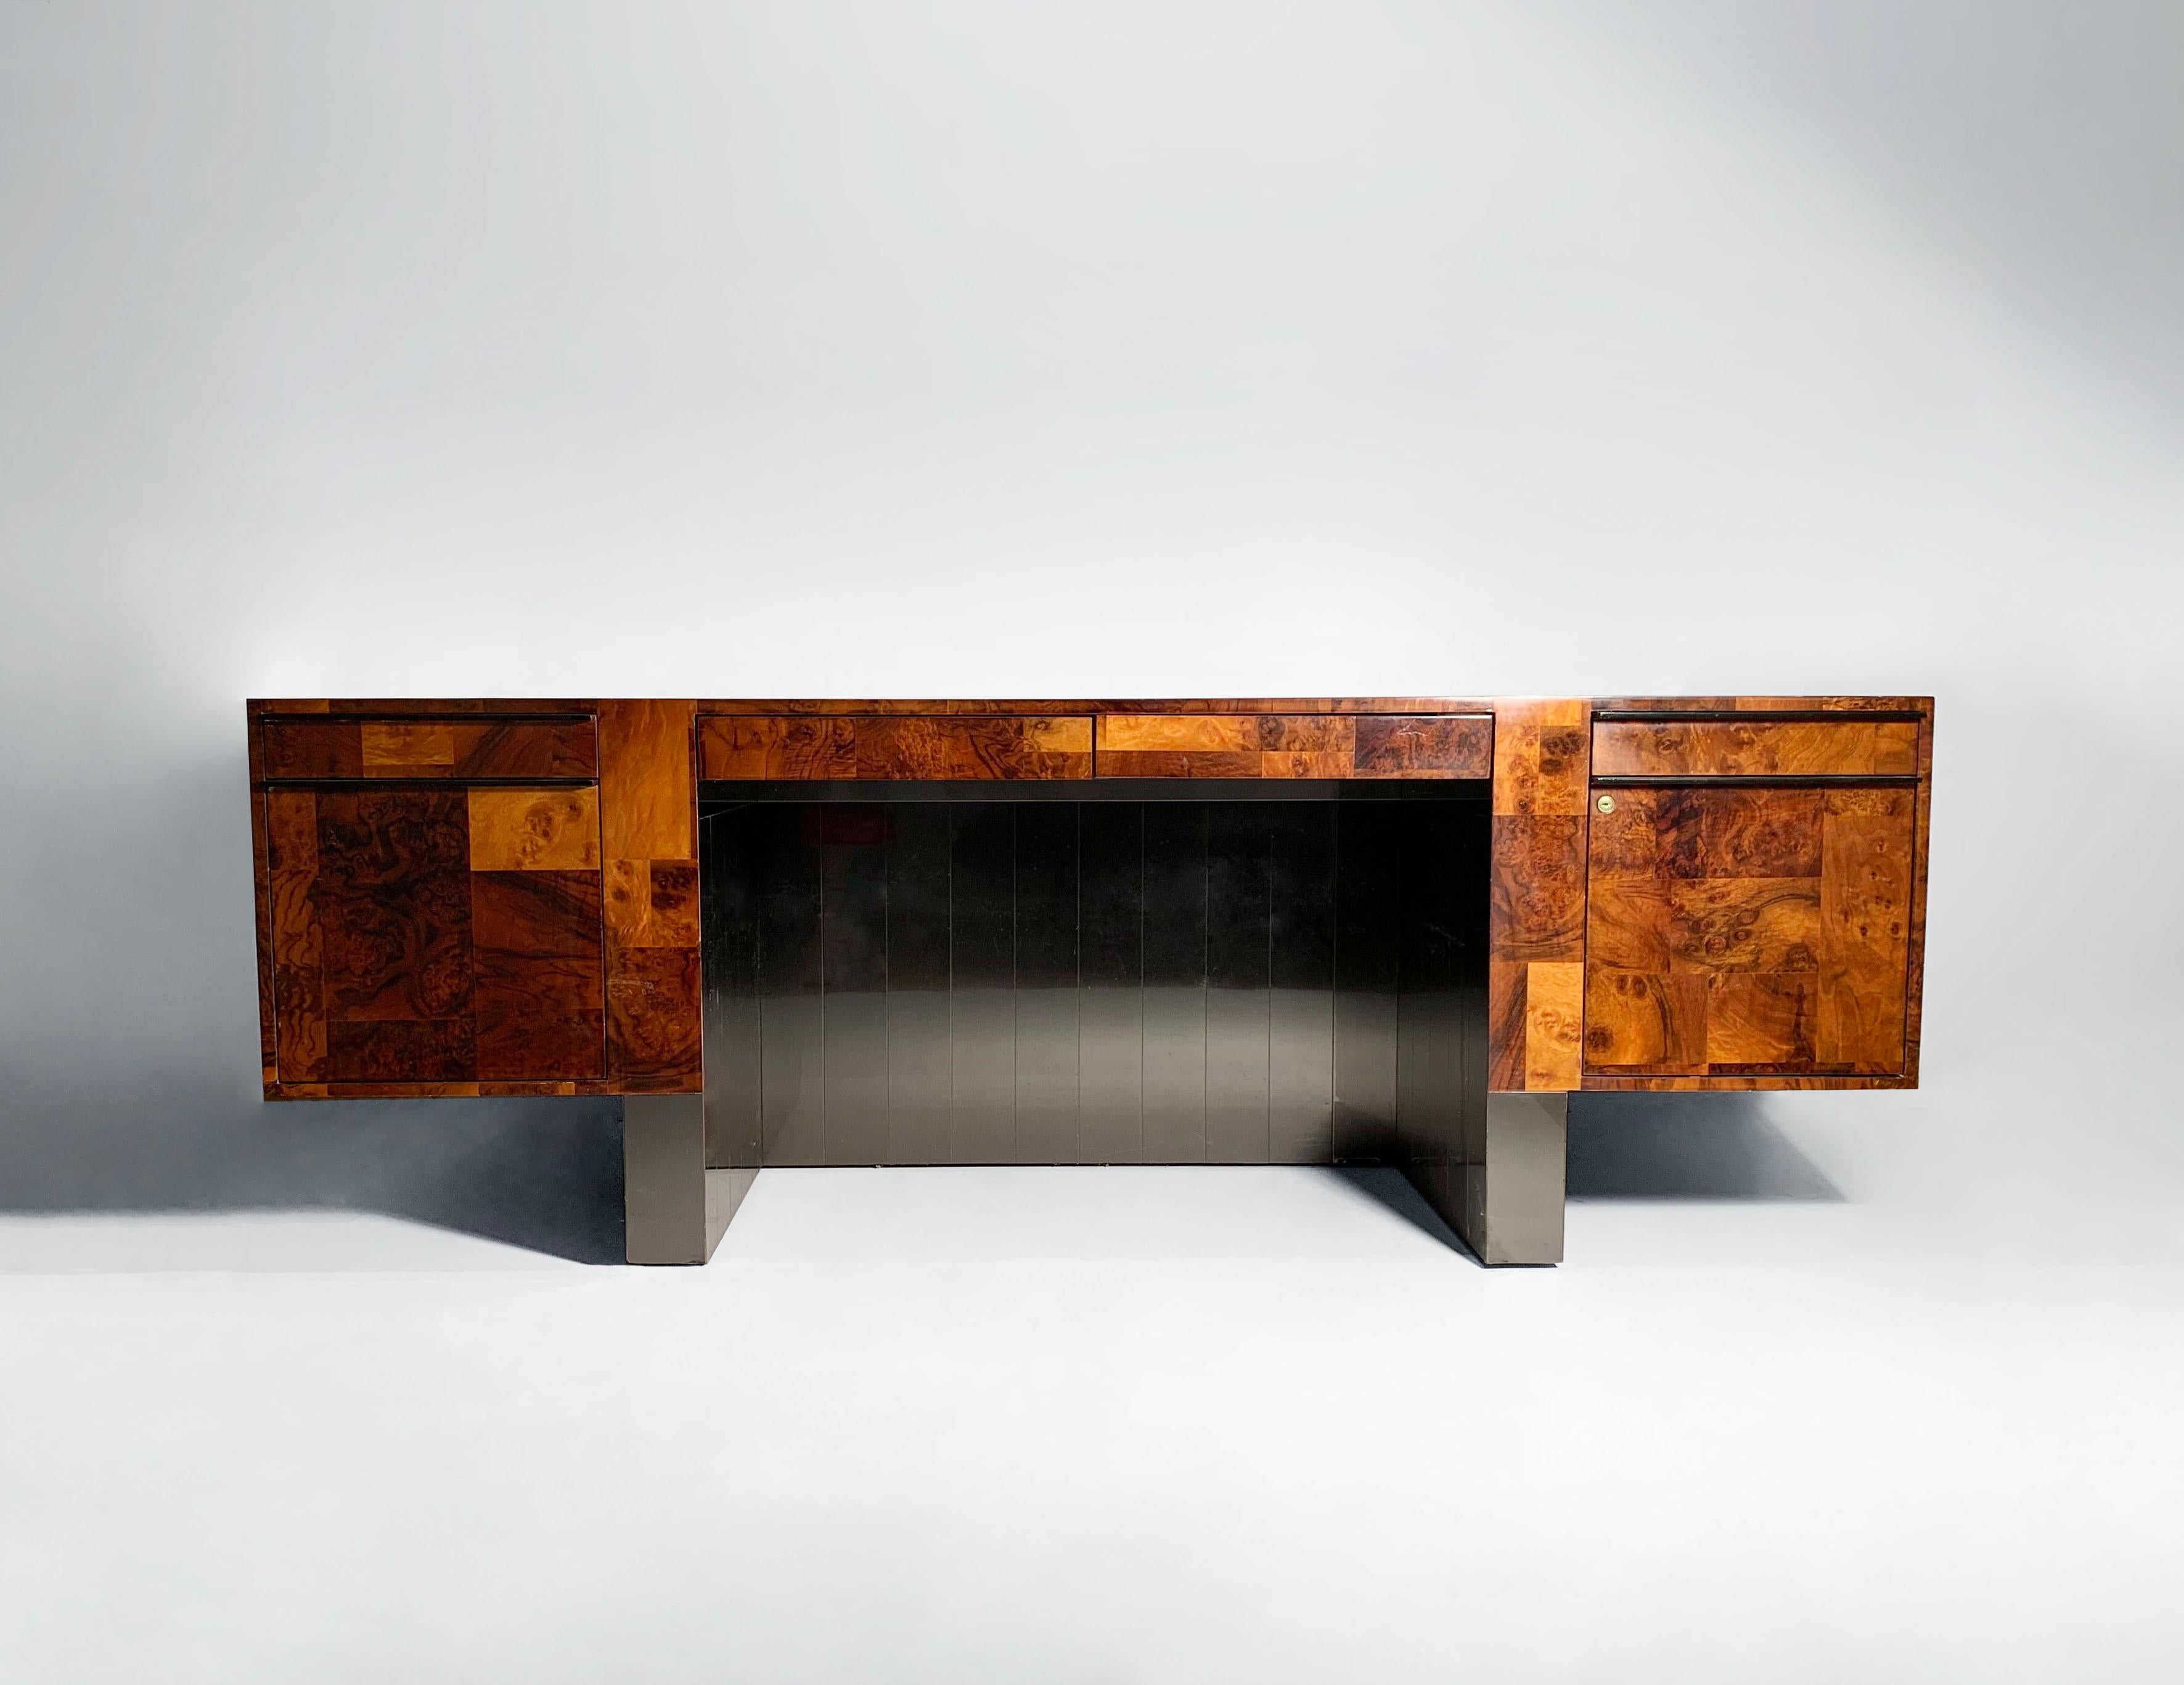 A period Paul Evans Desk in Cityscape Burl wood. In rather remarkable original condition minus some minor wear and tear that can easily be fixed.   Please request additional photos and condition report.